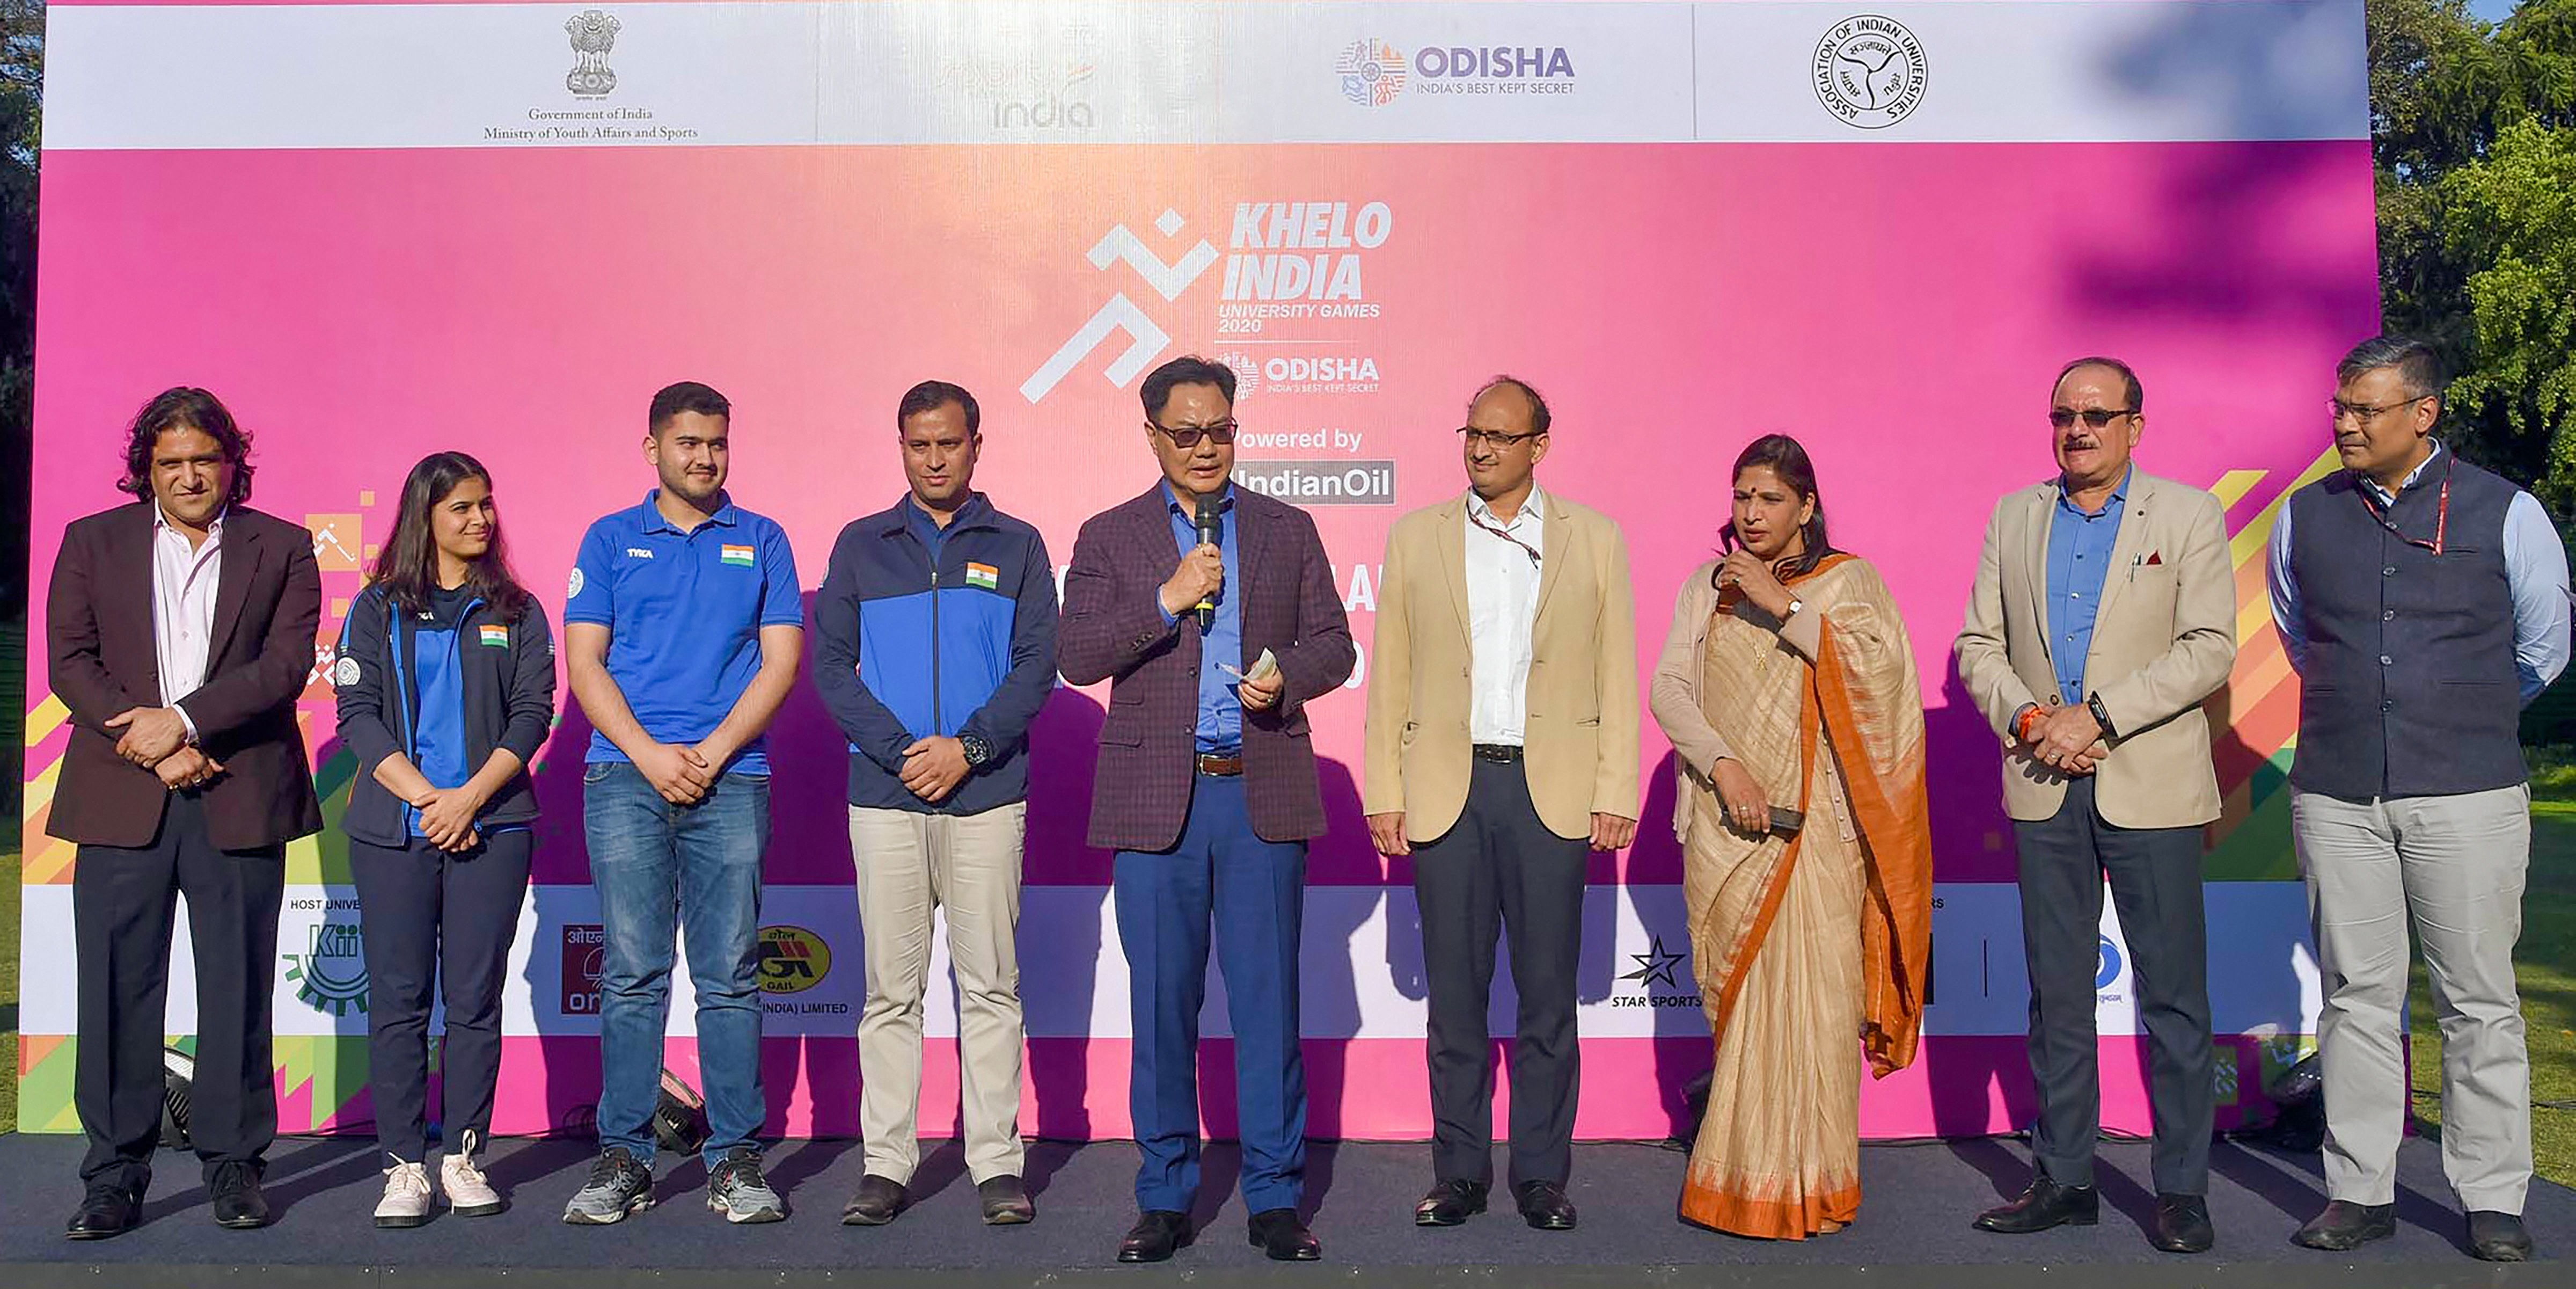 Union minister of state for youth affairs & sports (independent charge) and minority affairs Kiren Rijiju addresses at the launch of the Khelo India University Games Anthem, in New Delhi, Monday, February 17, 20